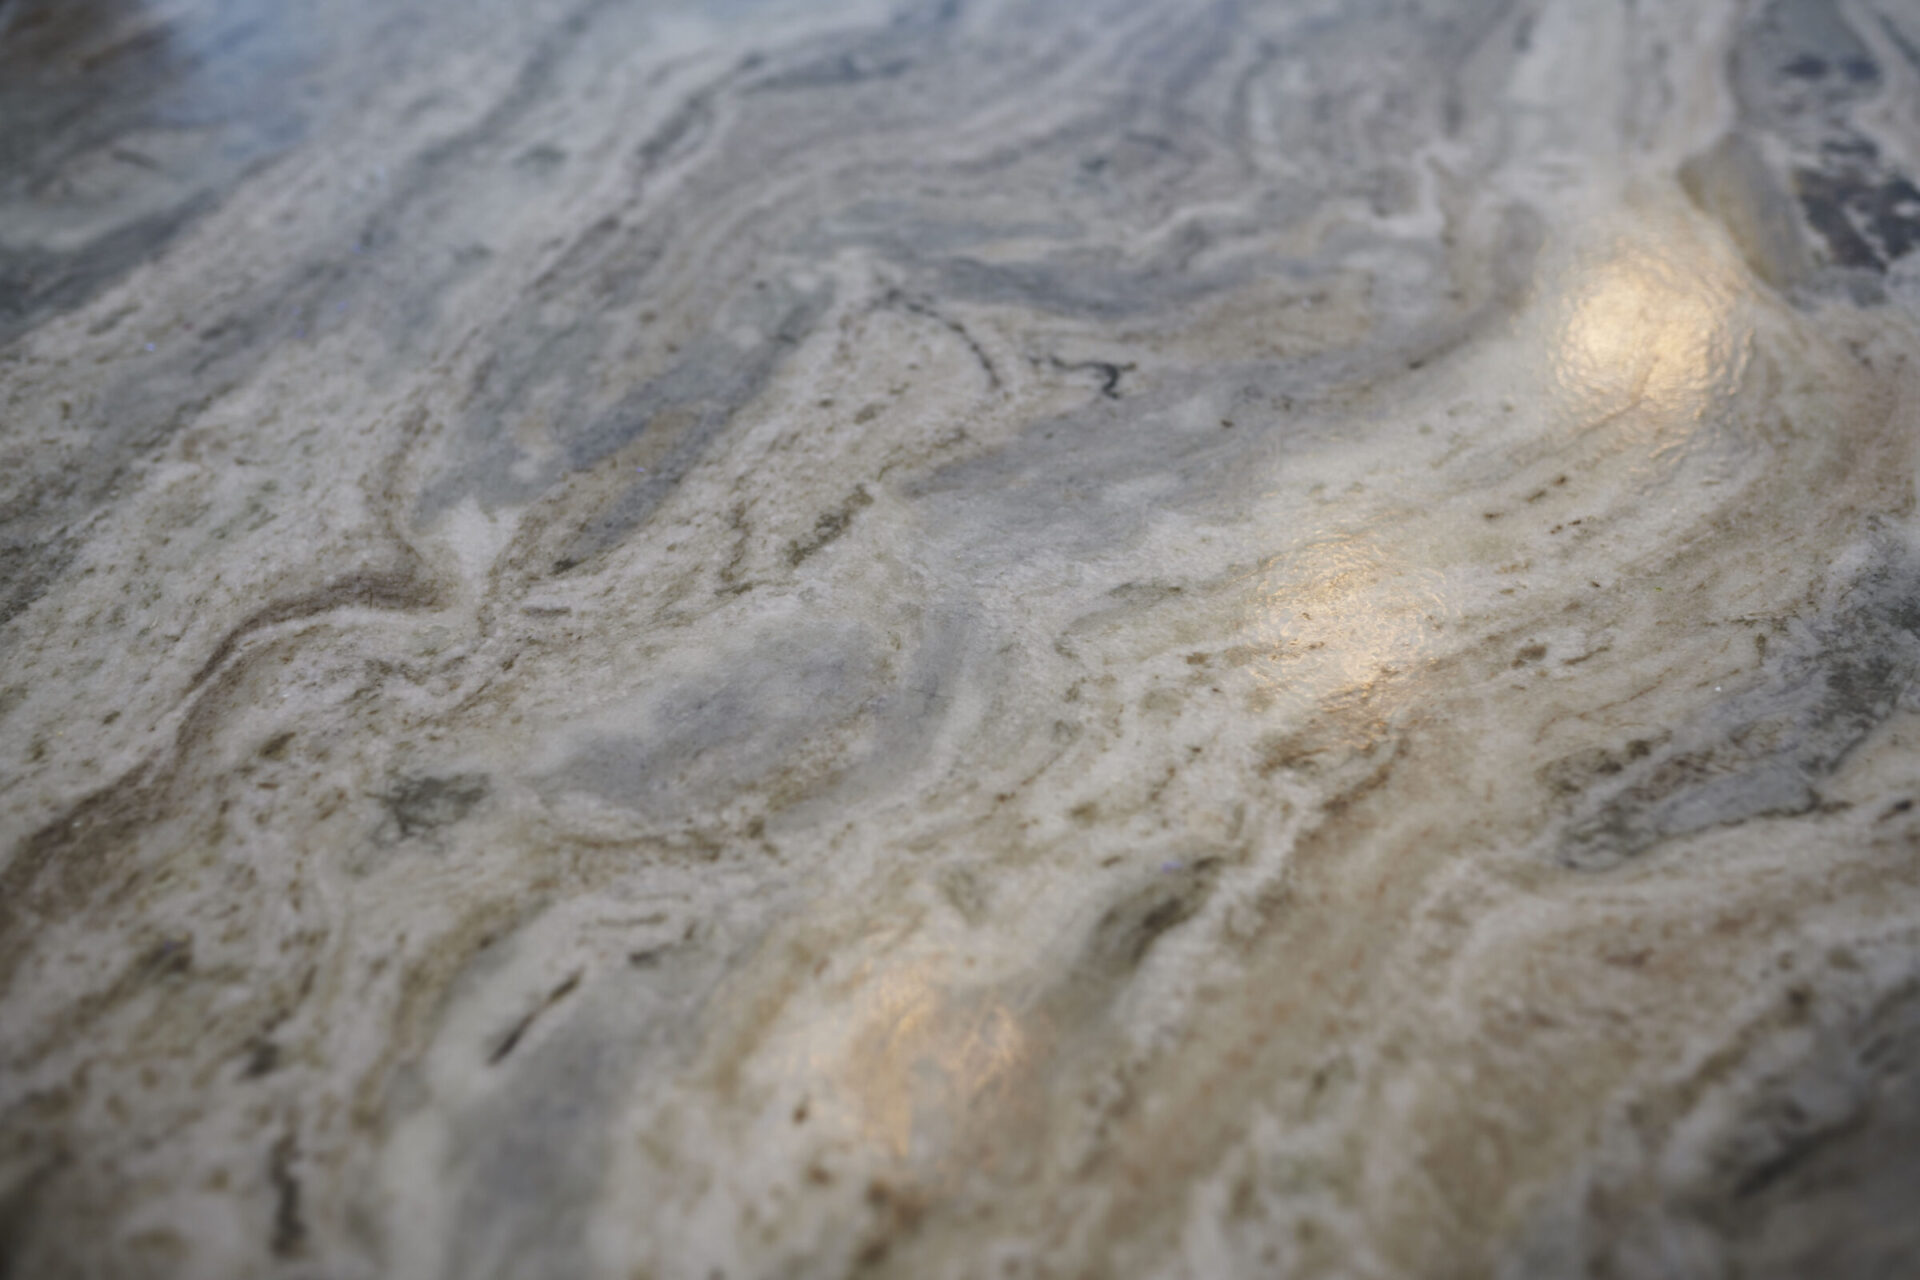 The image shows a close-up of a marble surface with intricate grey and white patterns, highlighted by soft, warm light reflections.